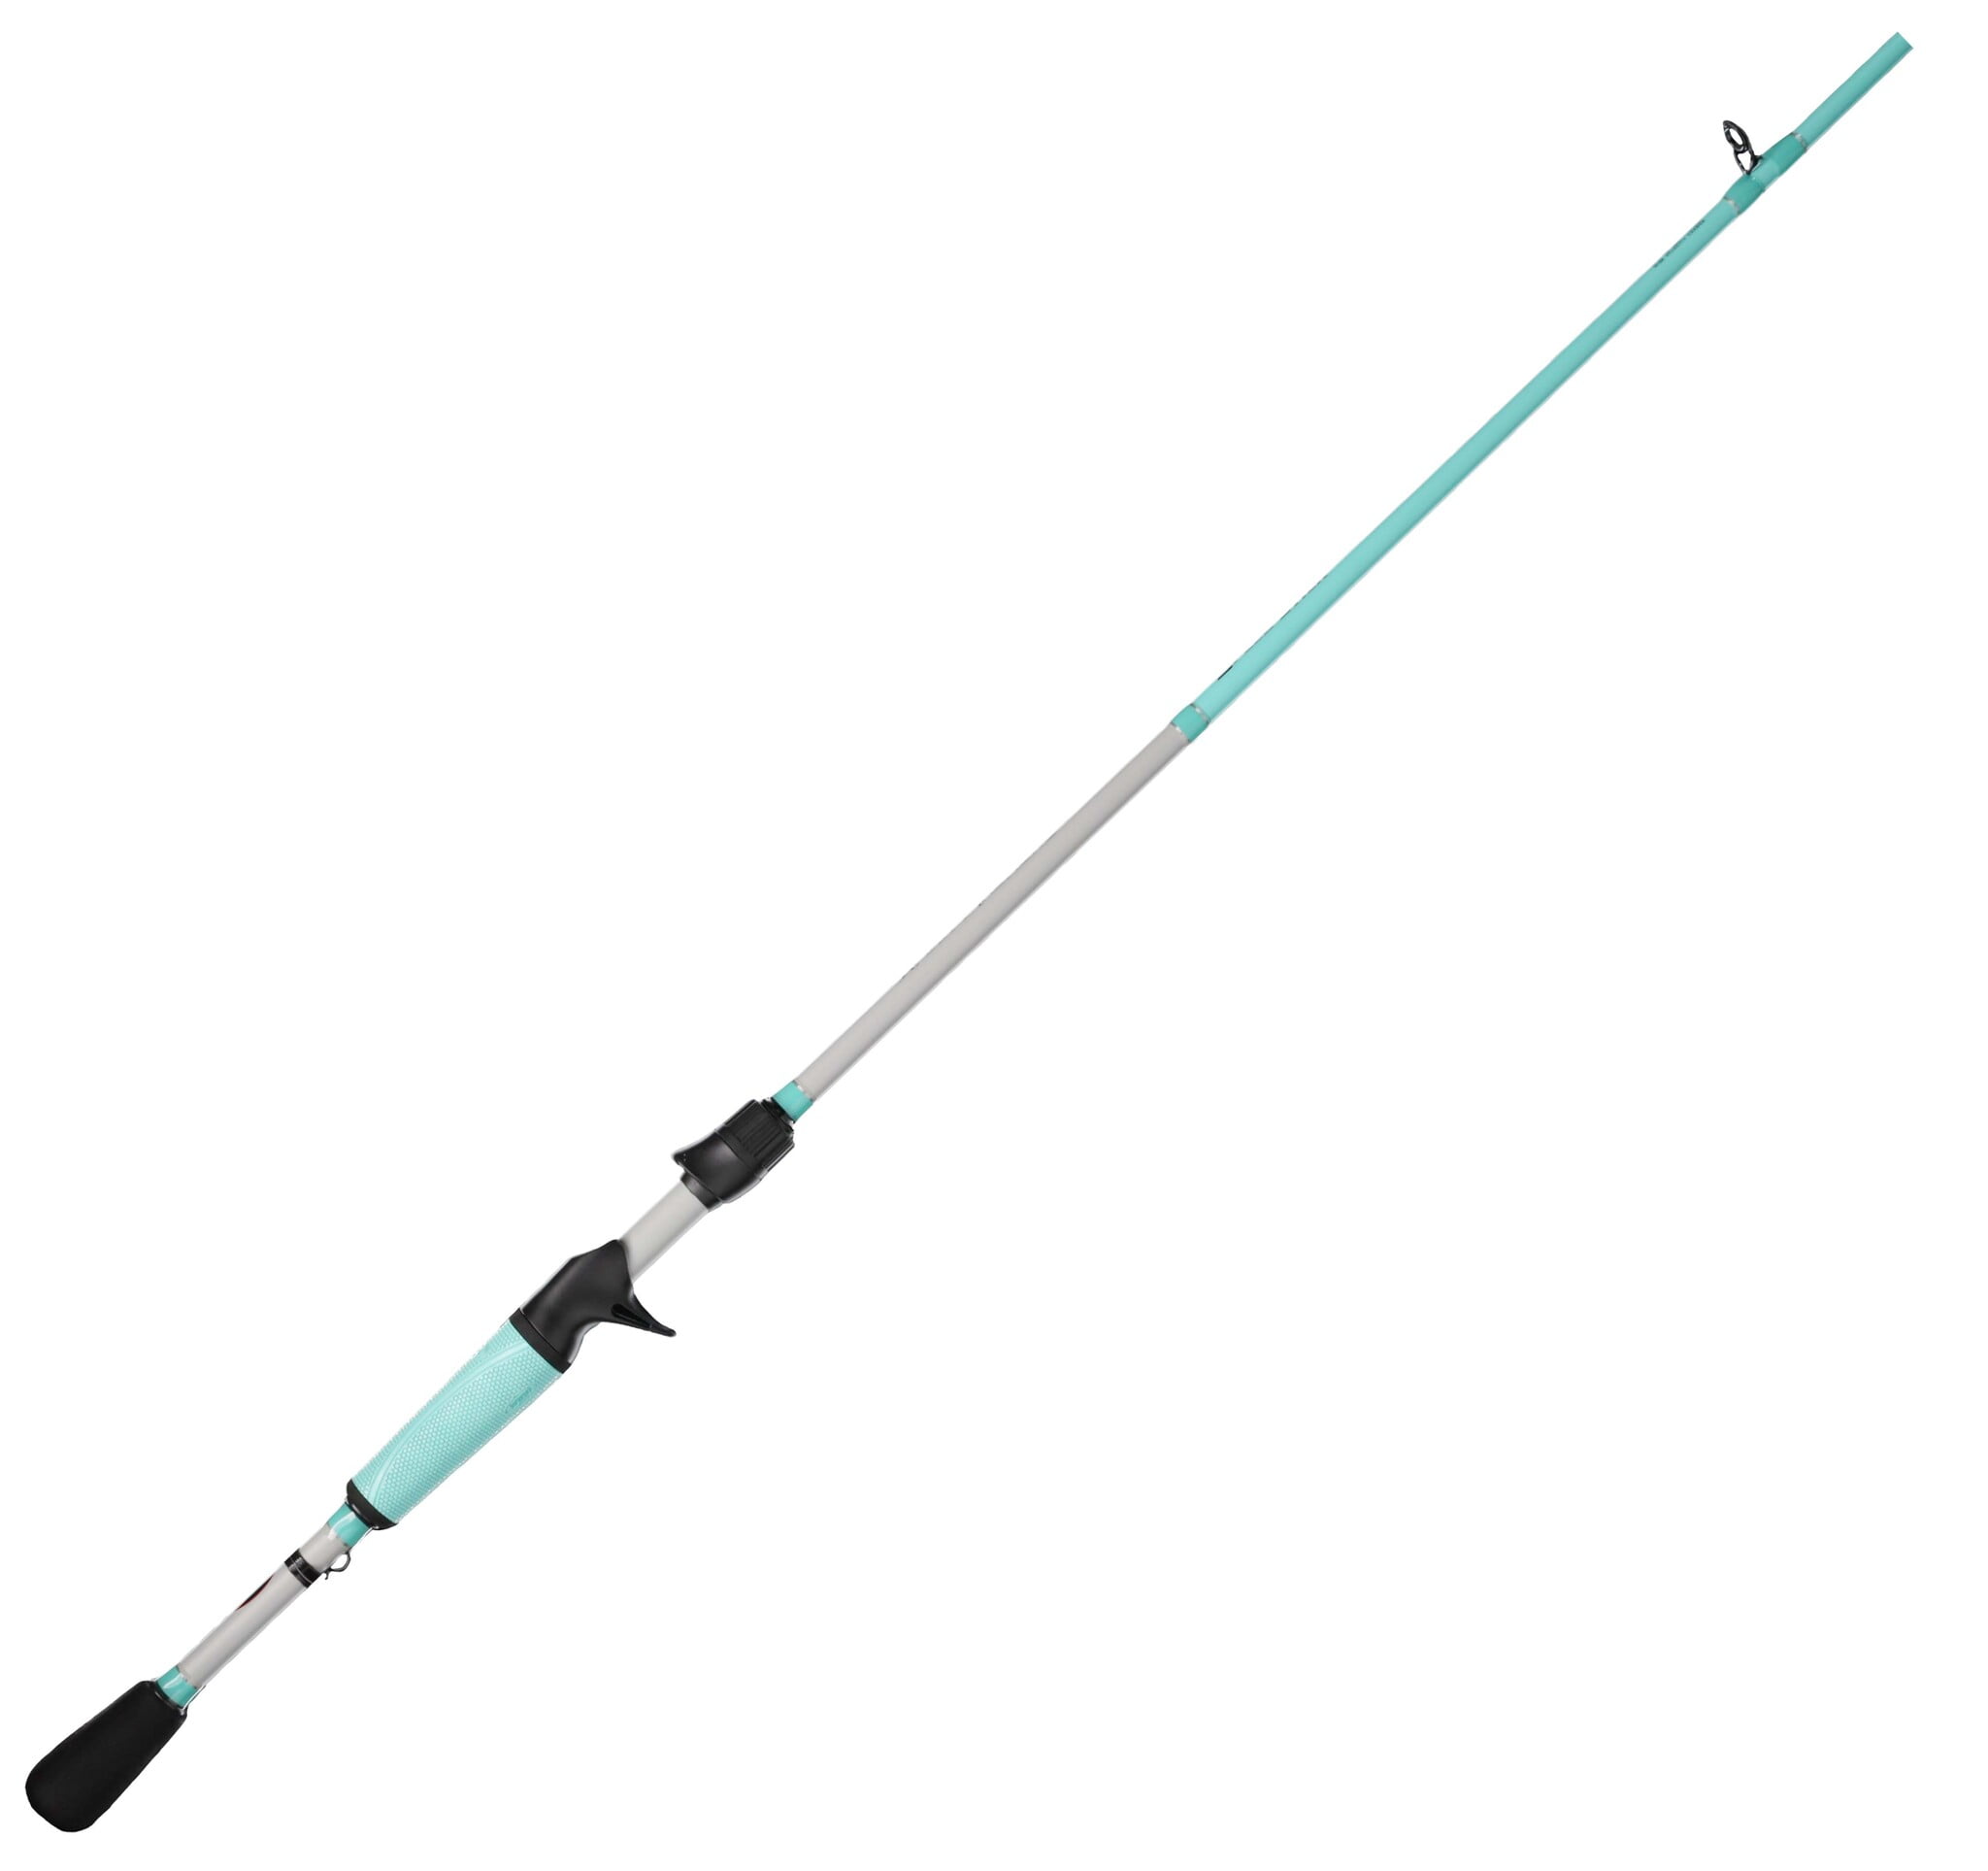  ZYHYD 58cm Fishing Rod and Fishing Reel Set, Ice Fishing Rod, Spinning  Rod Combo, Mini Children Fishing Rod, Beginner Fishing, Boat Fishing Rod,  Carp Rod ZYHYD (Size : Rod) 